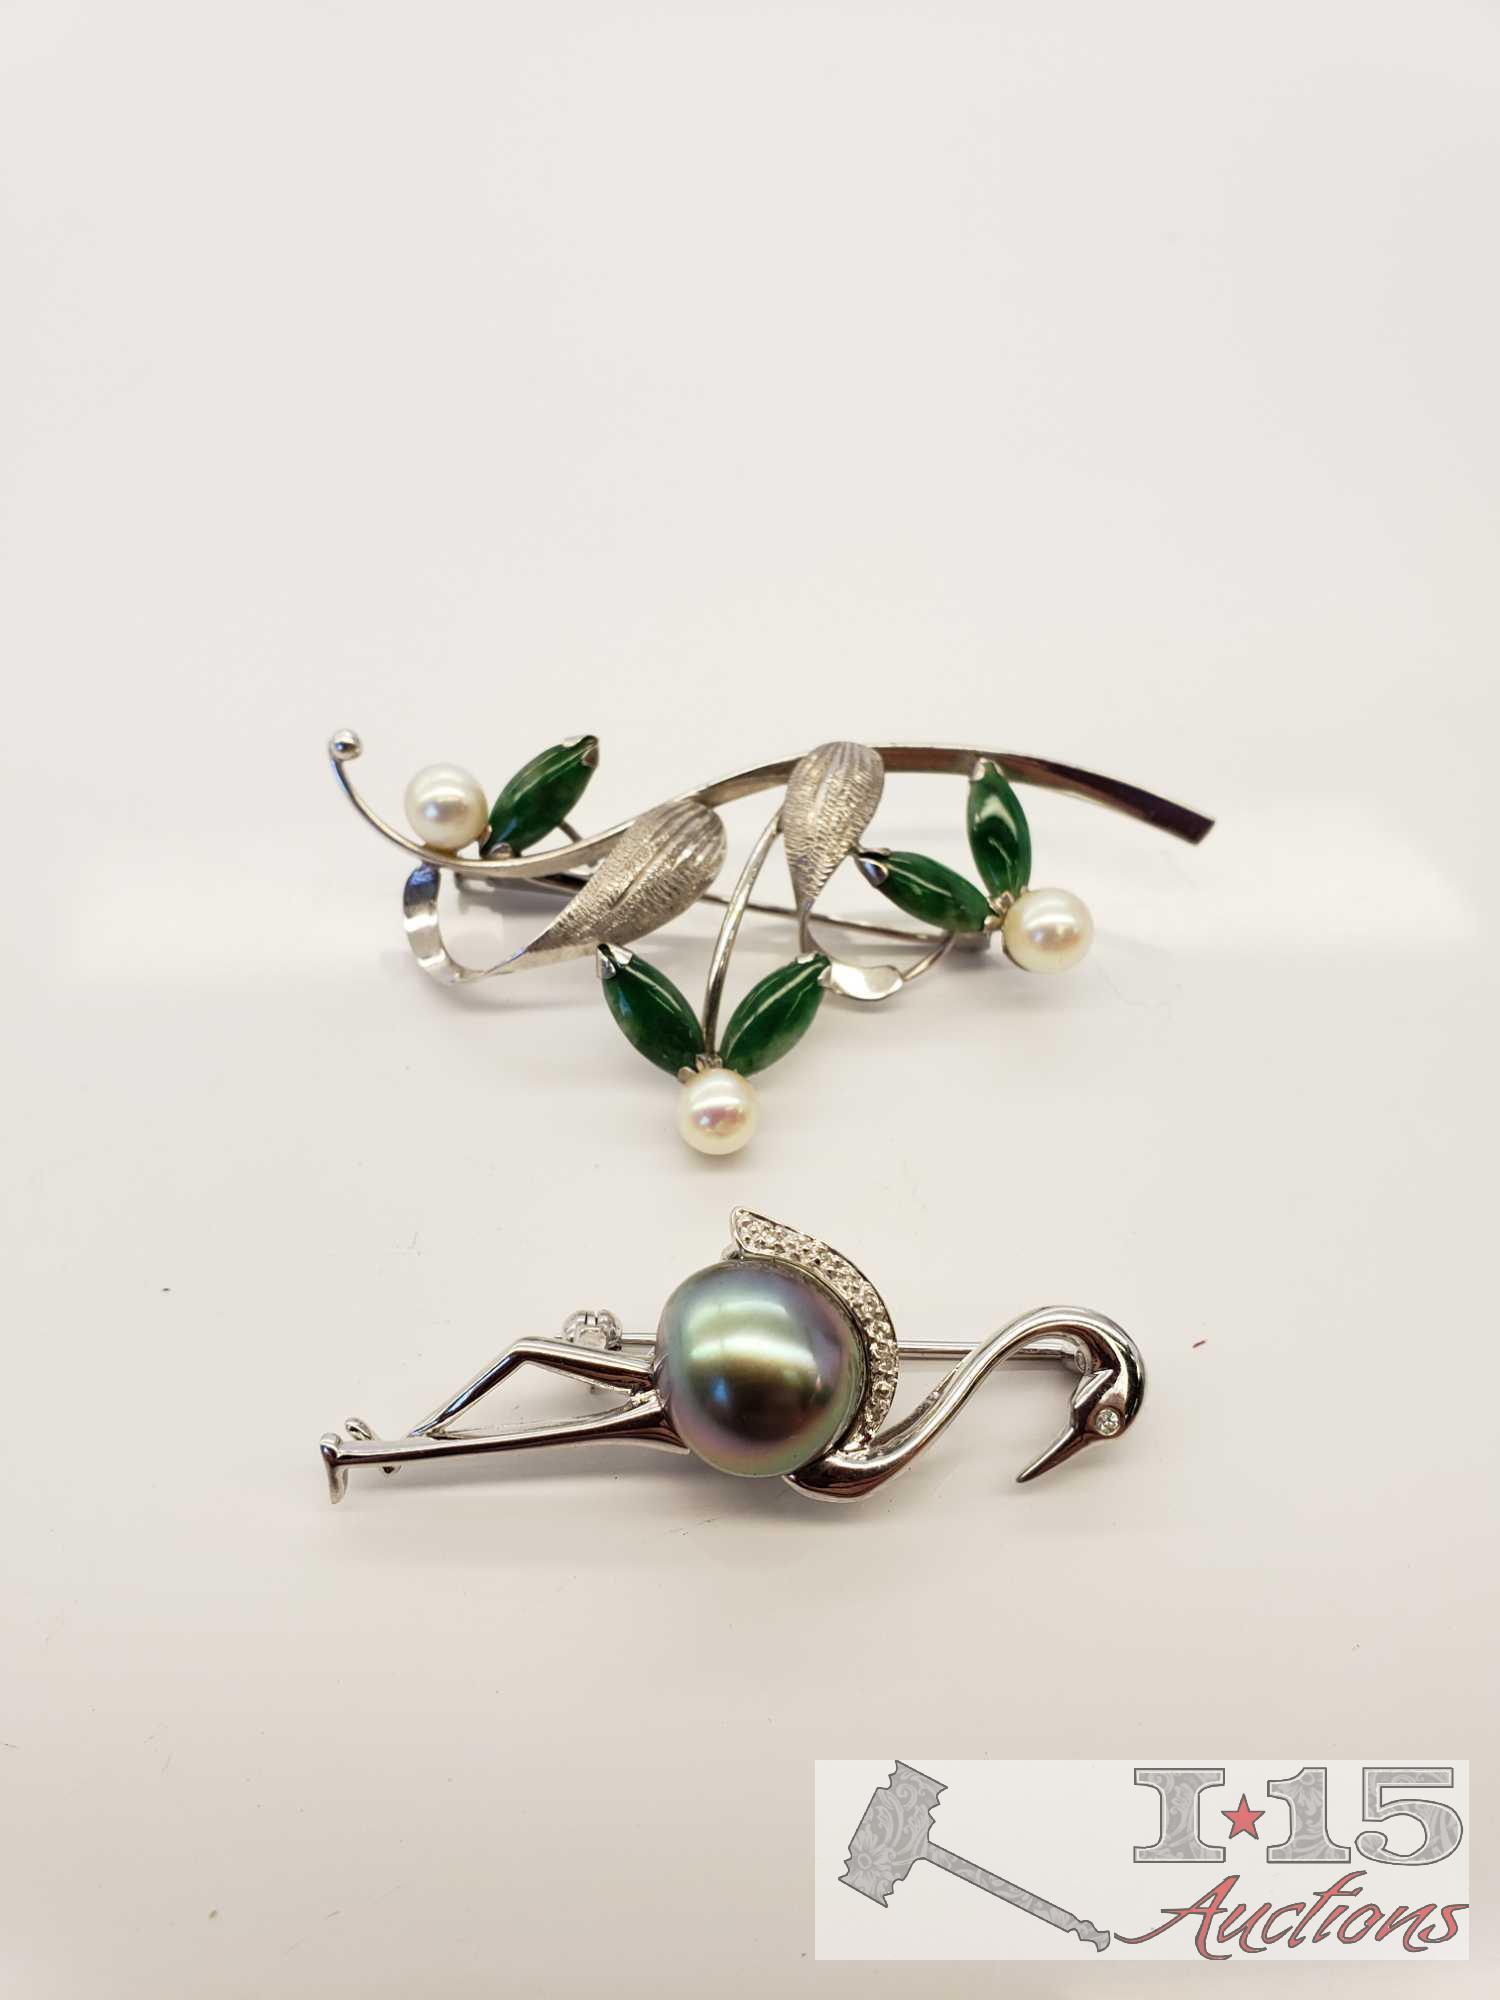 Two 14k White Gold Pins with Pearls